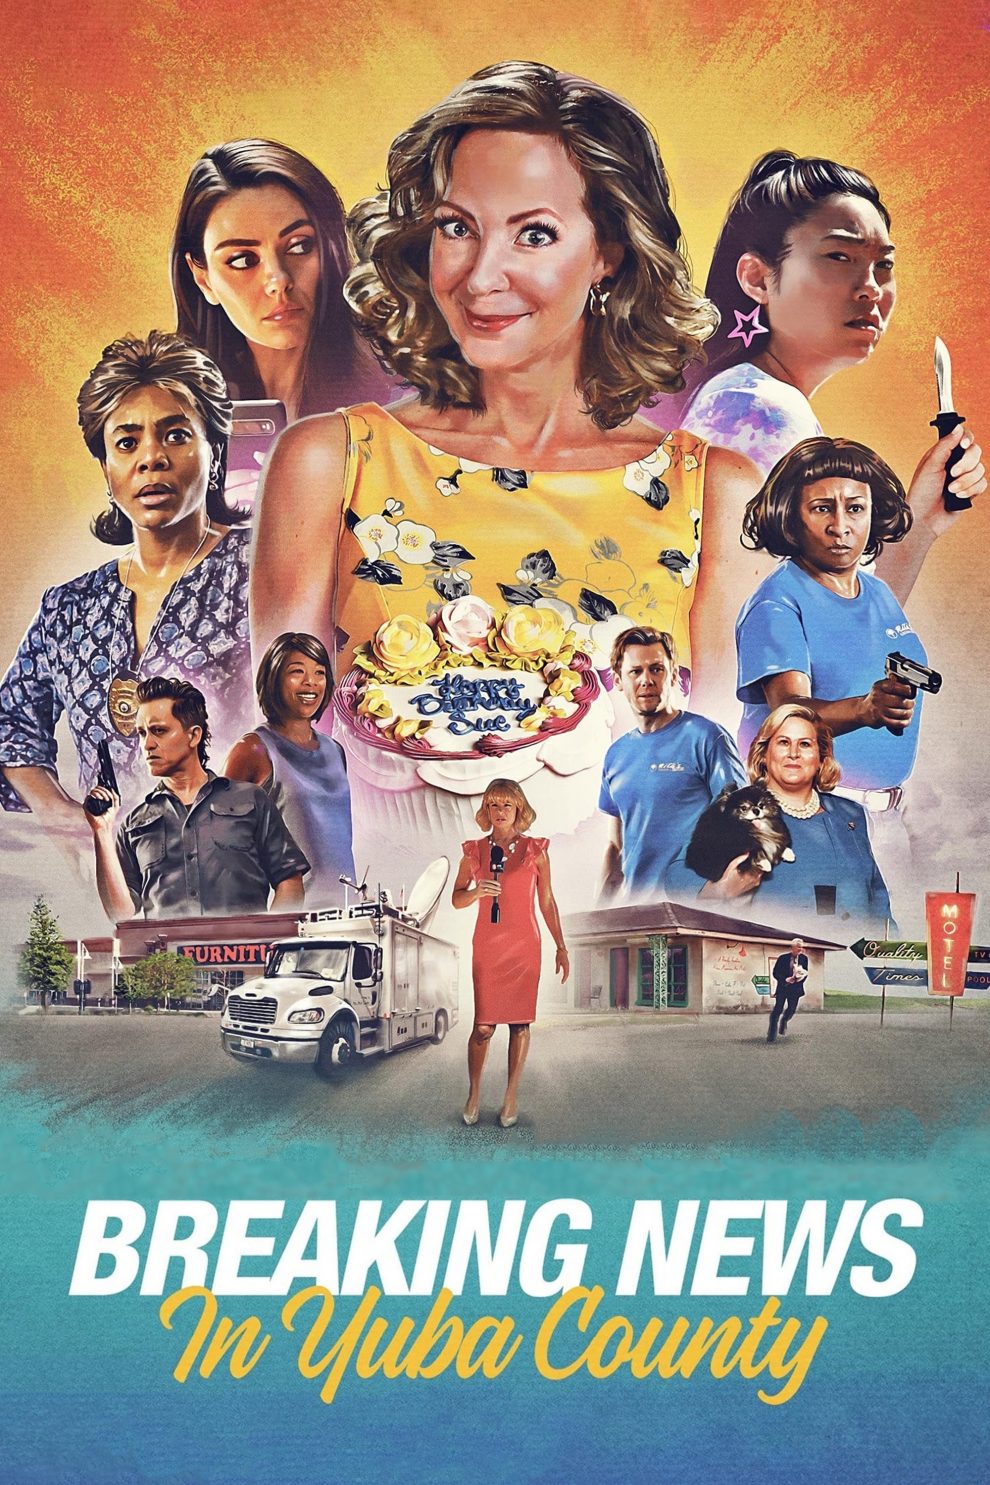 Poster for the movie "Breaking News in Yuba County"